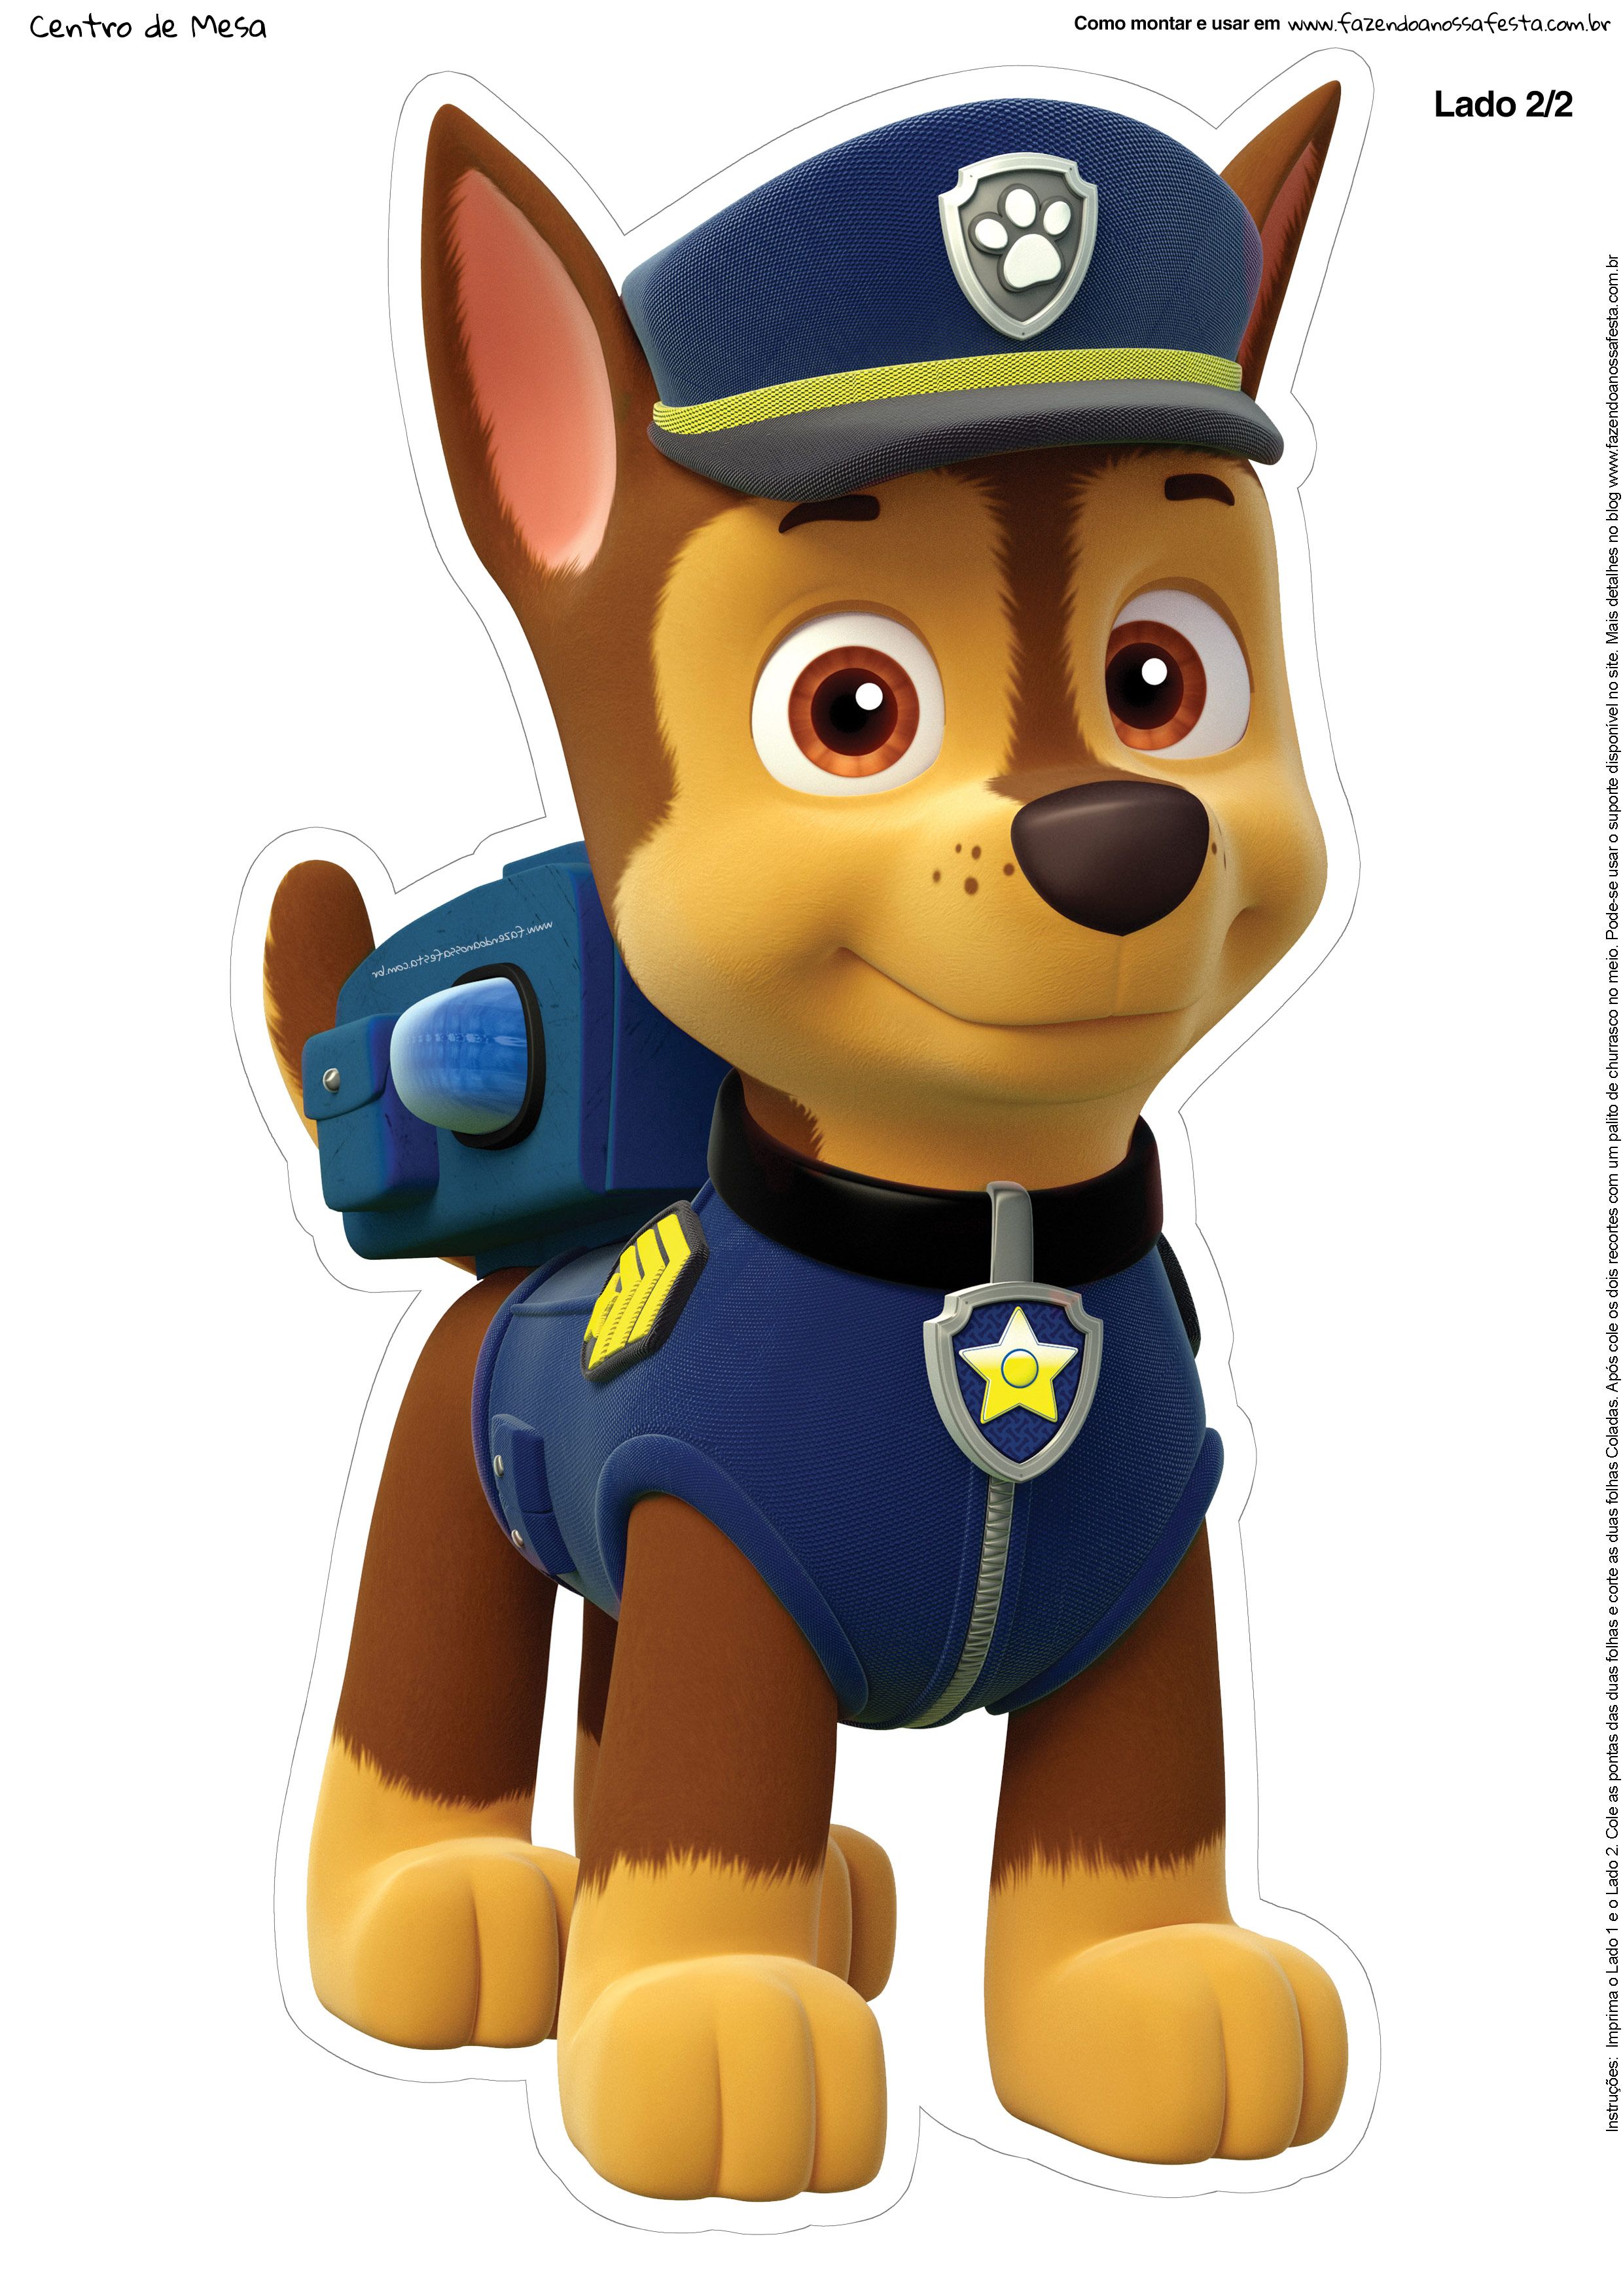 Download Hd Wallpapers Paw Patrol Printable - Personagens Patrulha Canina Chase , HD Wallpaper & Backgrounds